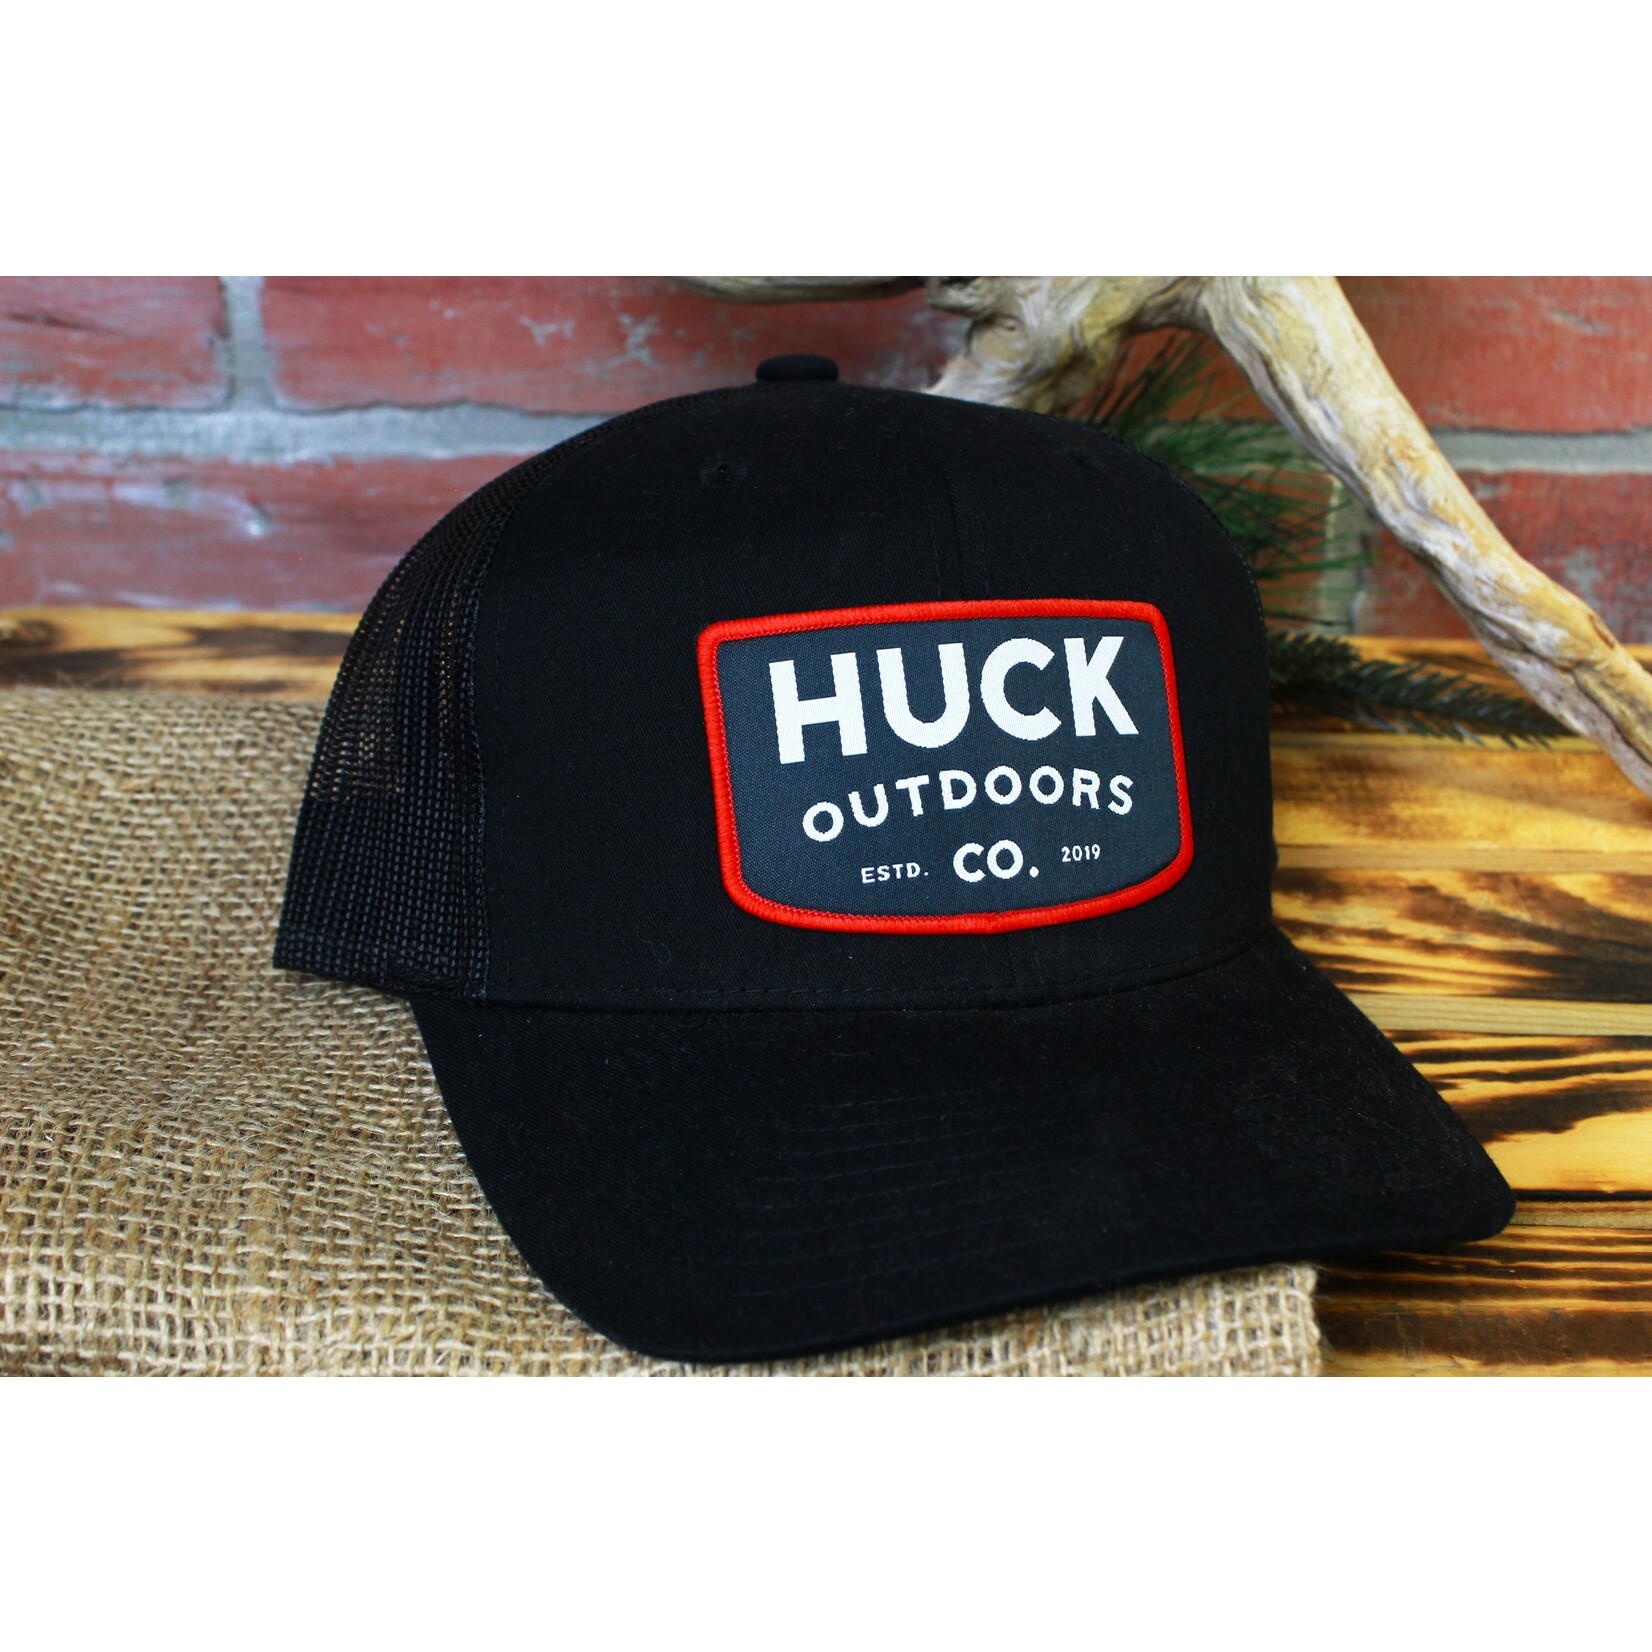 Huck Outdoors Huck Outdoors Red Trim Patch Snapback Hat